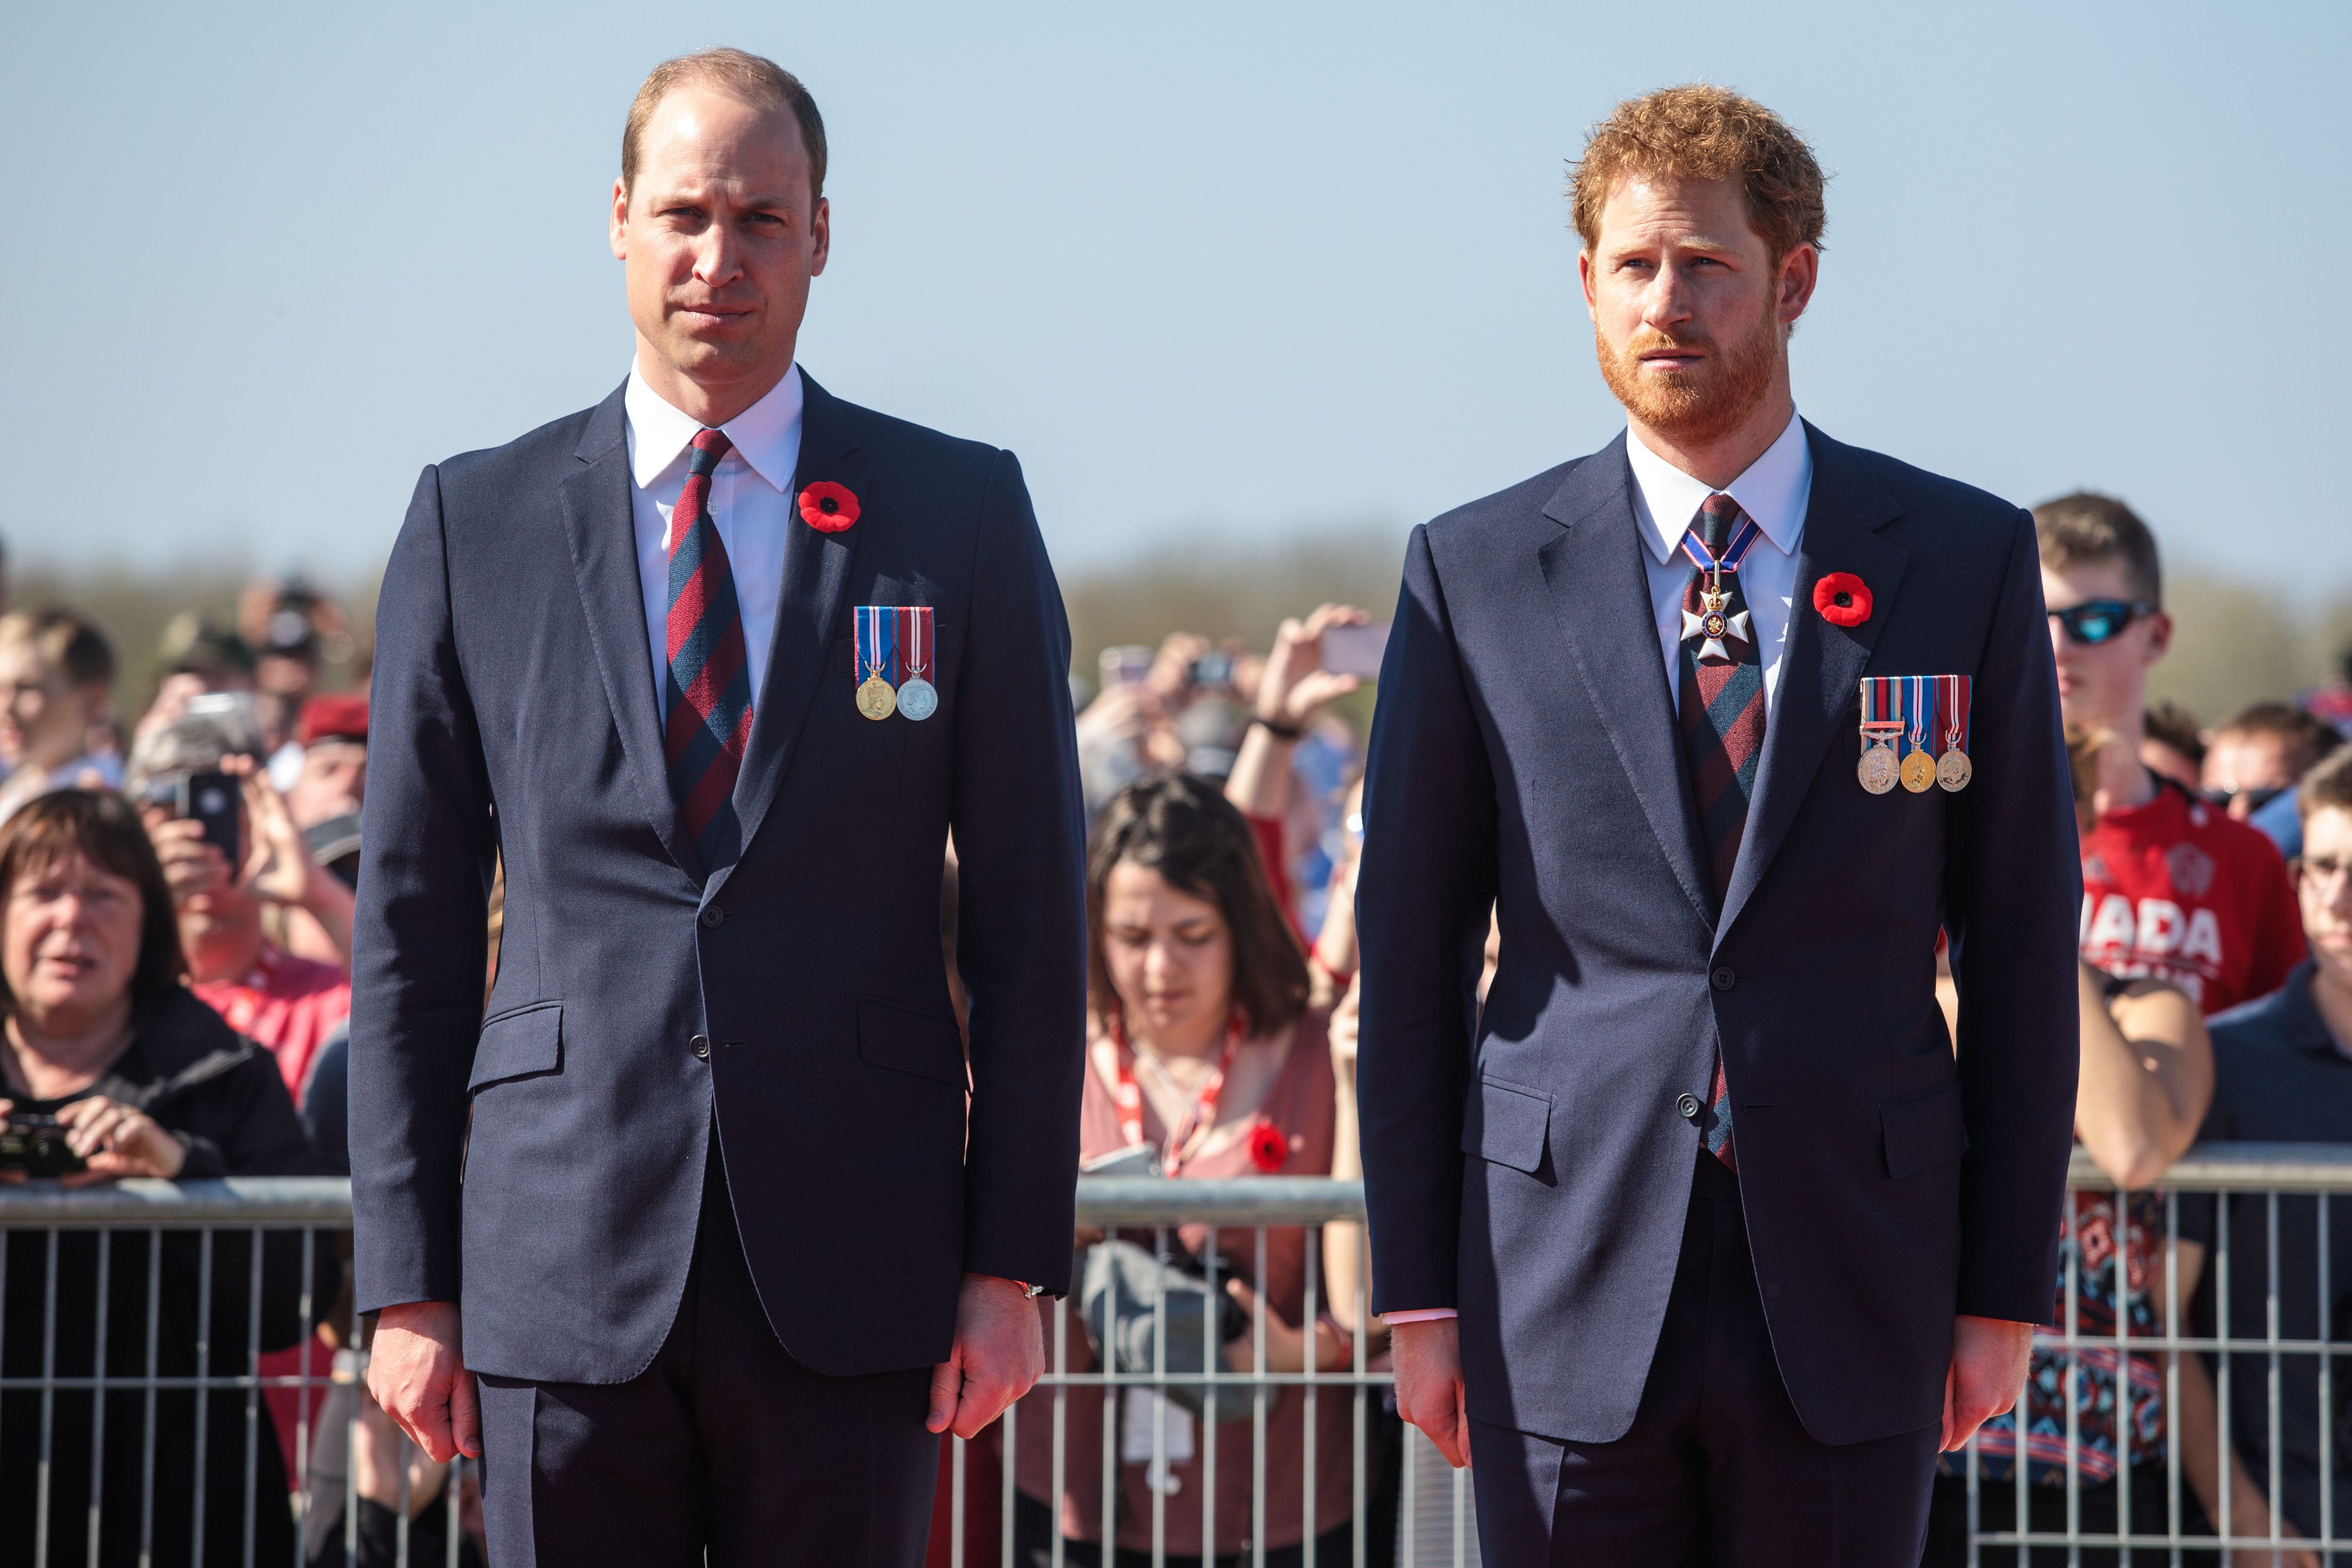 Prince William and Prince Harry at the Canadian National Vimy Memorial on April 9, 2017. | Source: Getty Images